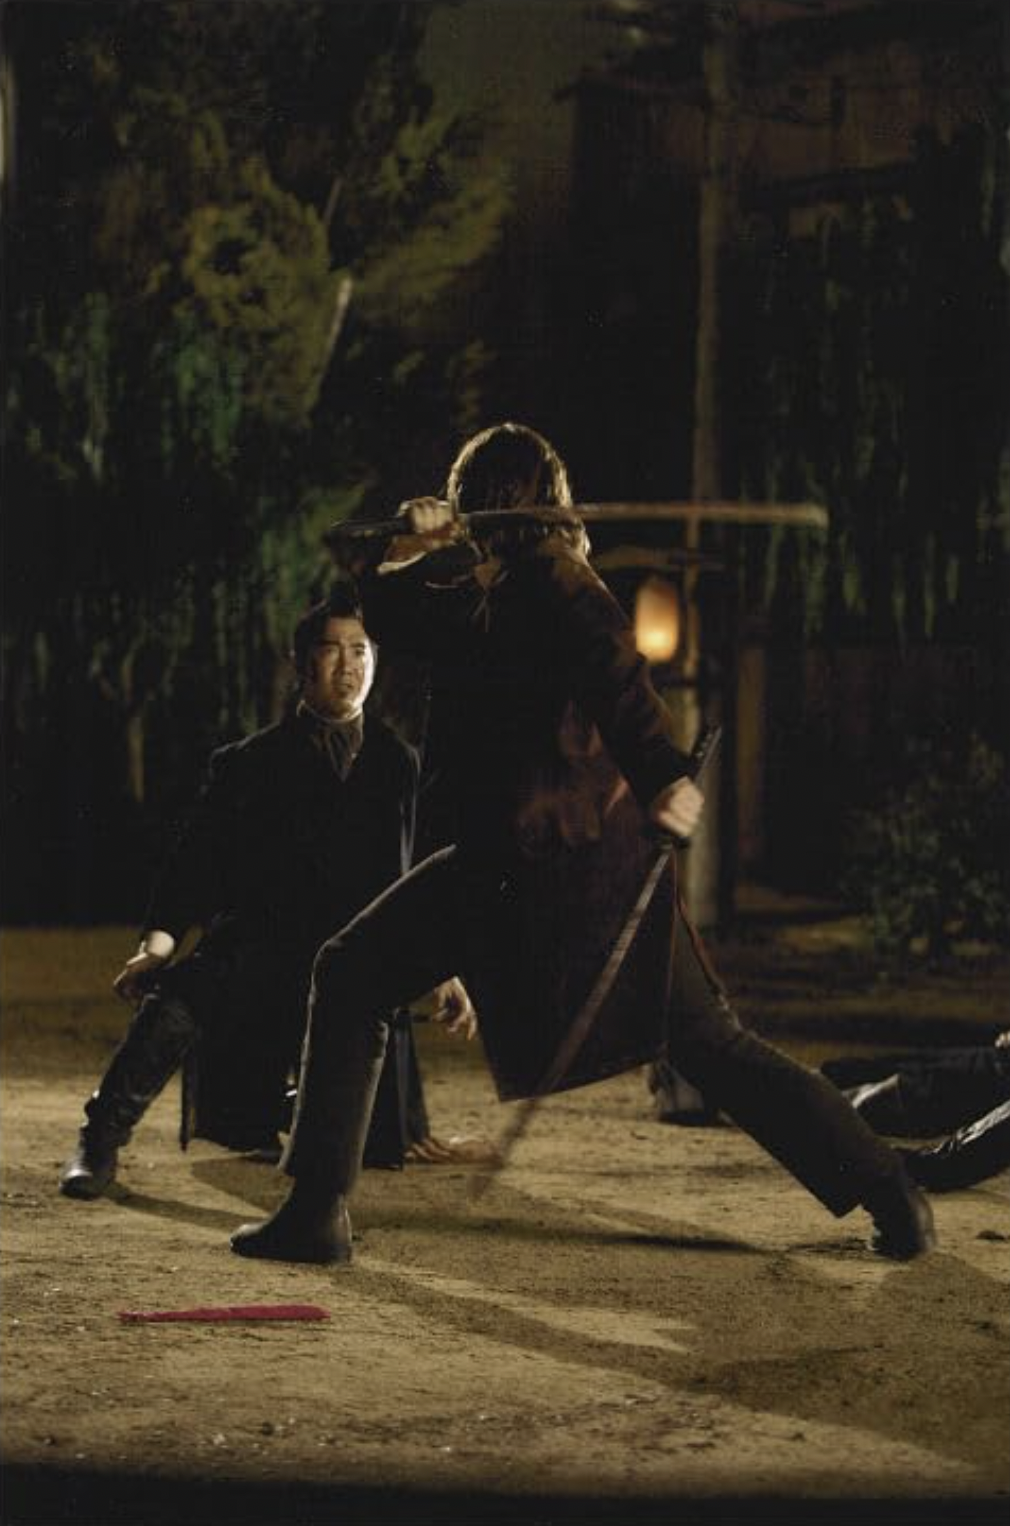 During the filming of 2003's The Last Samurai,  the invincible Tom Cruise narrowly escaped a life-threatening situation, yet once again. During a fight sequence with co-star Hiroyuki Sanada atop mechanical horses, Cruise faced a terrifying near-decapitation incident. As Sanada swung a real-life samurai sword towards him, the horse meant to stop in time failed to do so, putting Cruise in imminent danger. <p>Luckily, Sanada managed to pull back his sword in the nick of time, averting a tragedy that had everyone on set in a state of shock and relief.</p>“Tom’s neck was right in front of me, and I tried to stop swinging my sword, but it was hard to control with one hand,” Sanada said <a href="https://www.washingtonpost.com/archive/lifestyle/2004/01/16/names-38/4d8f7cdd-5c0b-495f-900a-a9789a38bcde/">in an interview.</a> “The film crew watching from the side all screamed because they thought Tom’s head would fly off.”